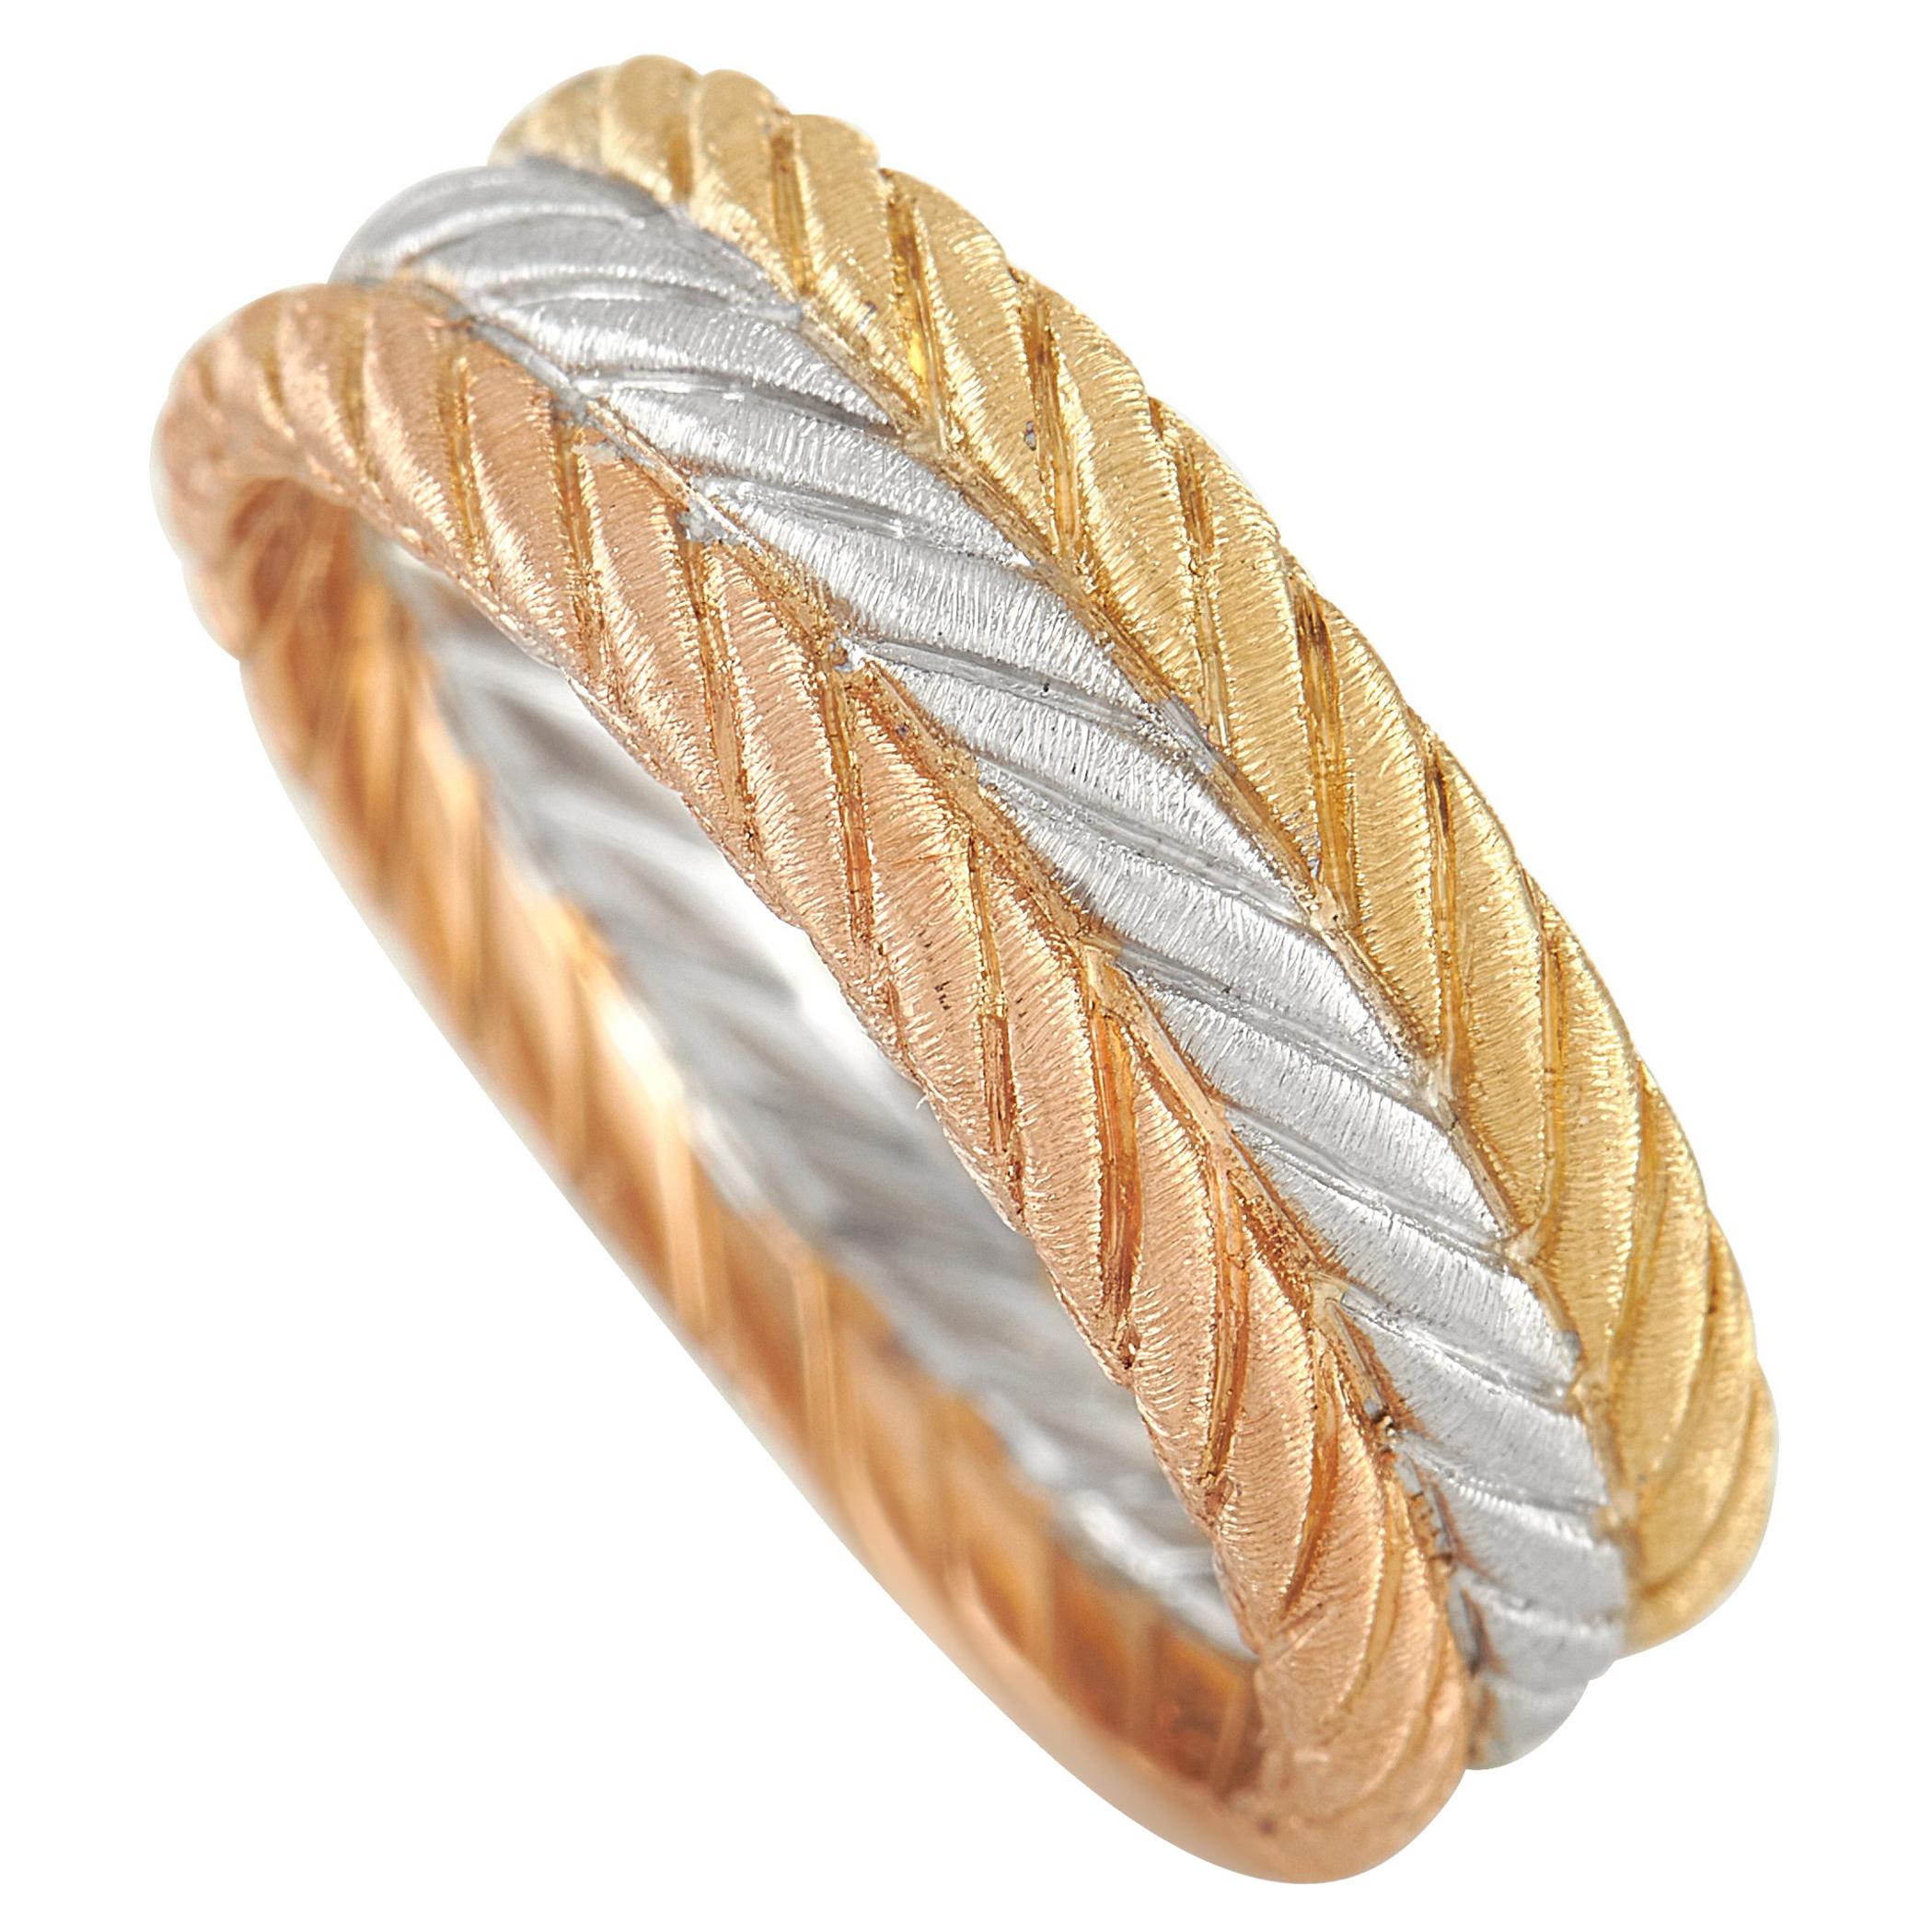 Buccellati Tricolor 18k Yellow, Rose, and White Gold Band Ring